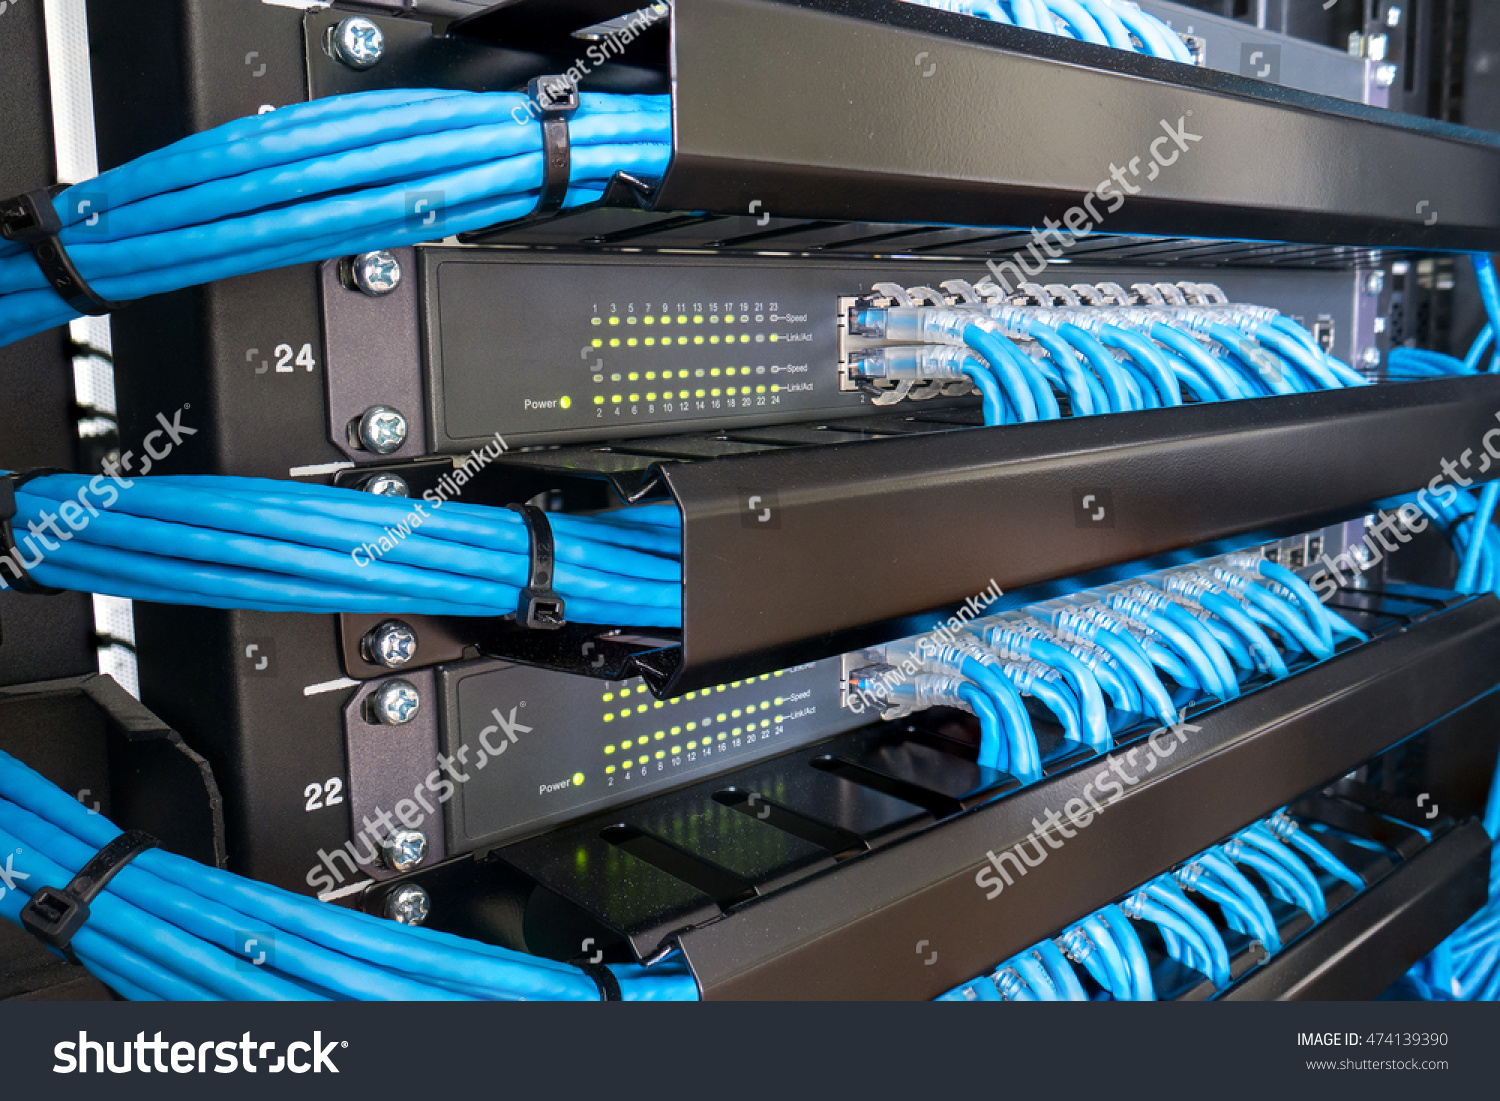 Network Switch And Ethernet Cables In Rack Cabinet